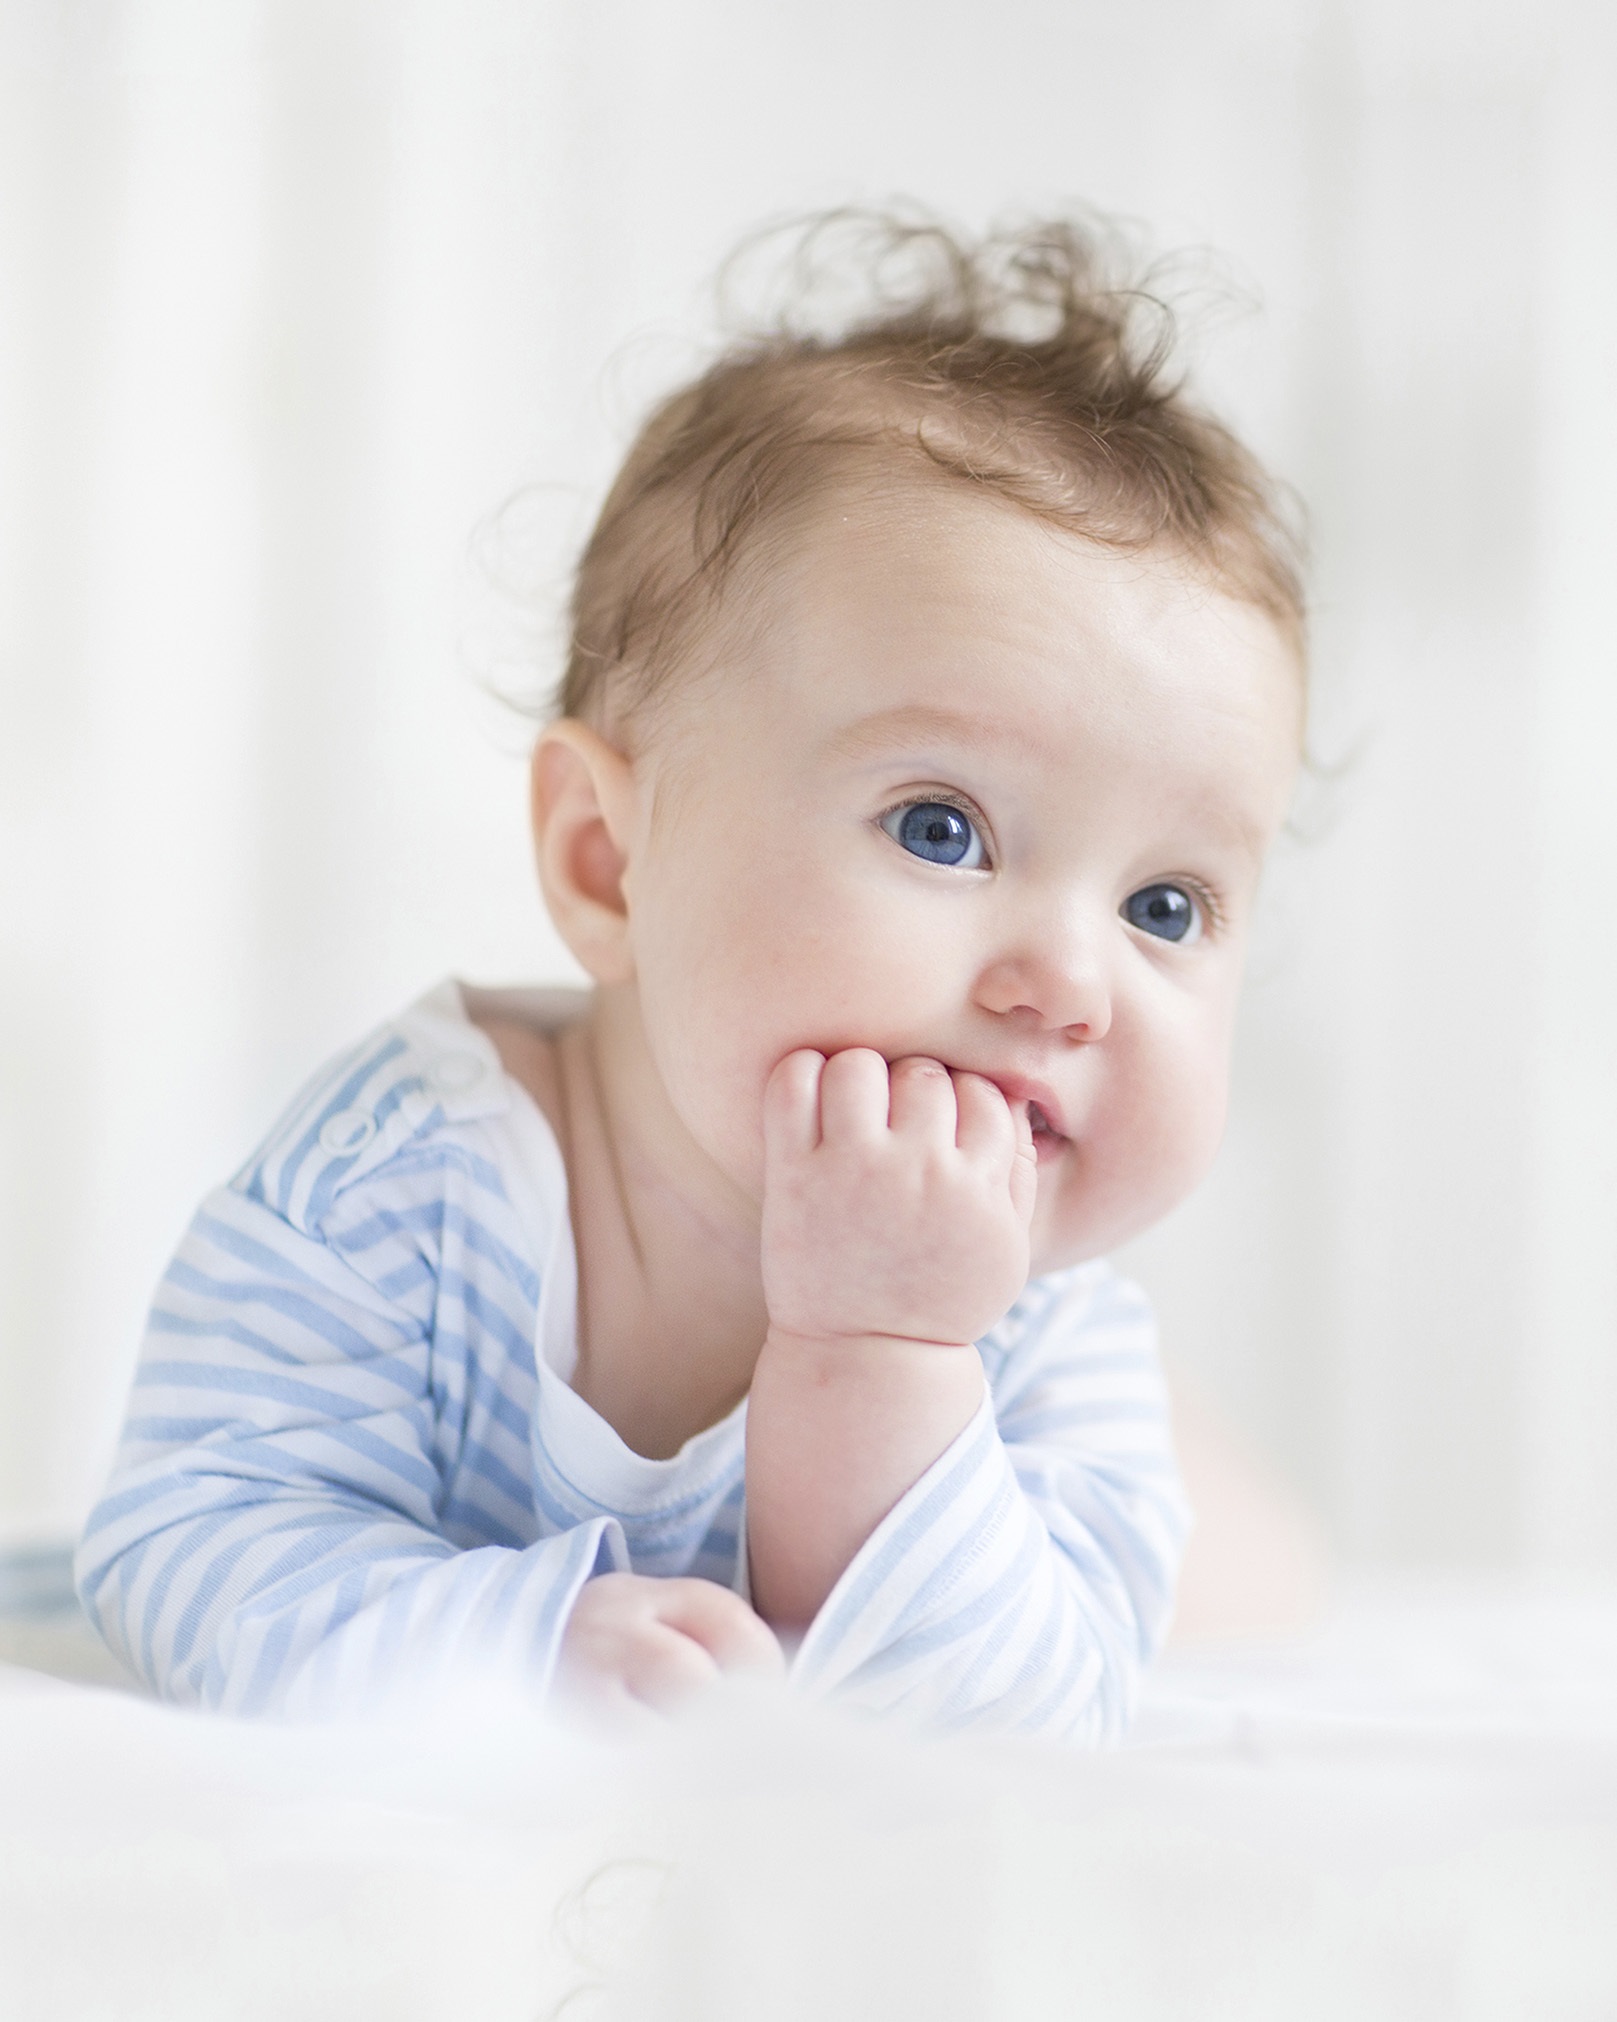 hottest gender neutral baby names, gender neutral names, most popular gender neautral baby names 2015, Some of the worst baby names in the world have been revealed